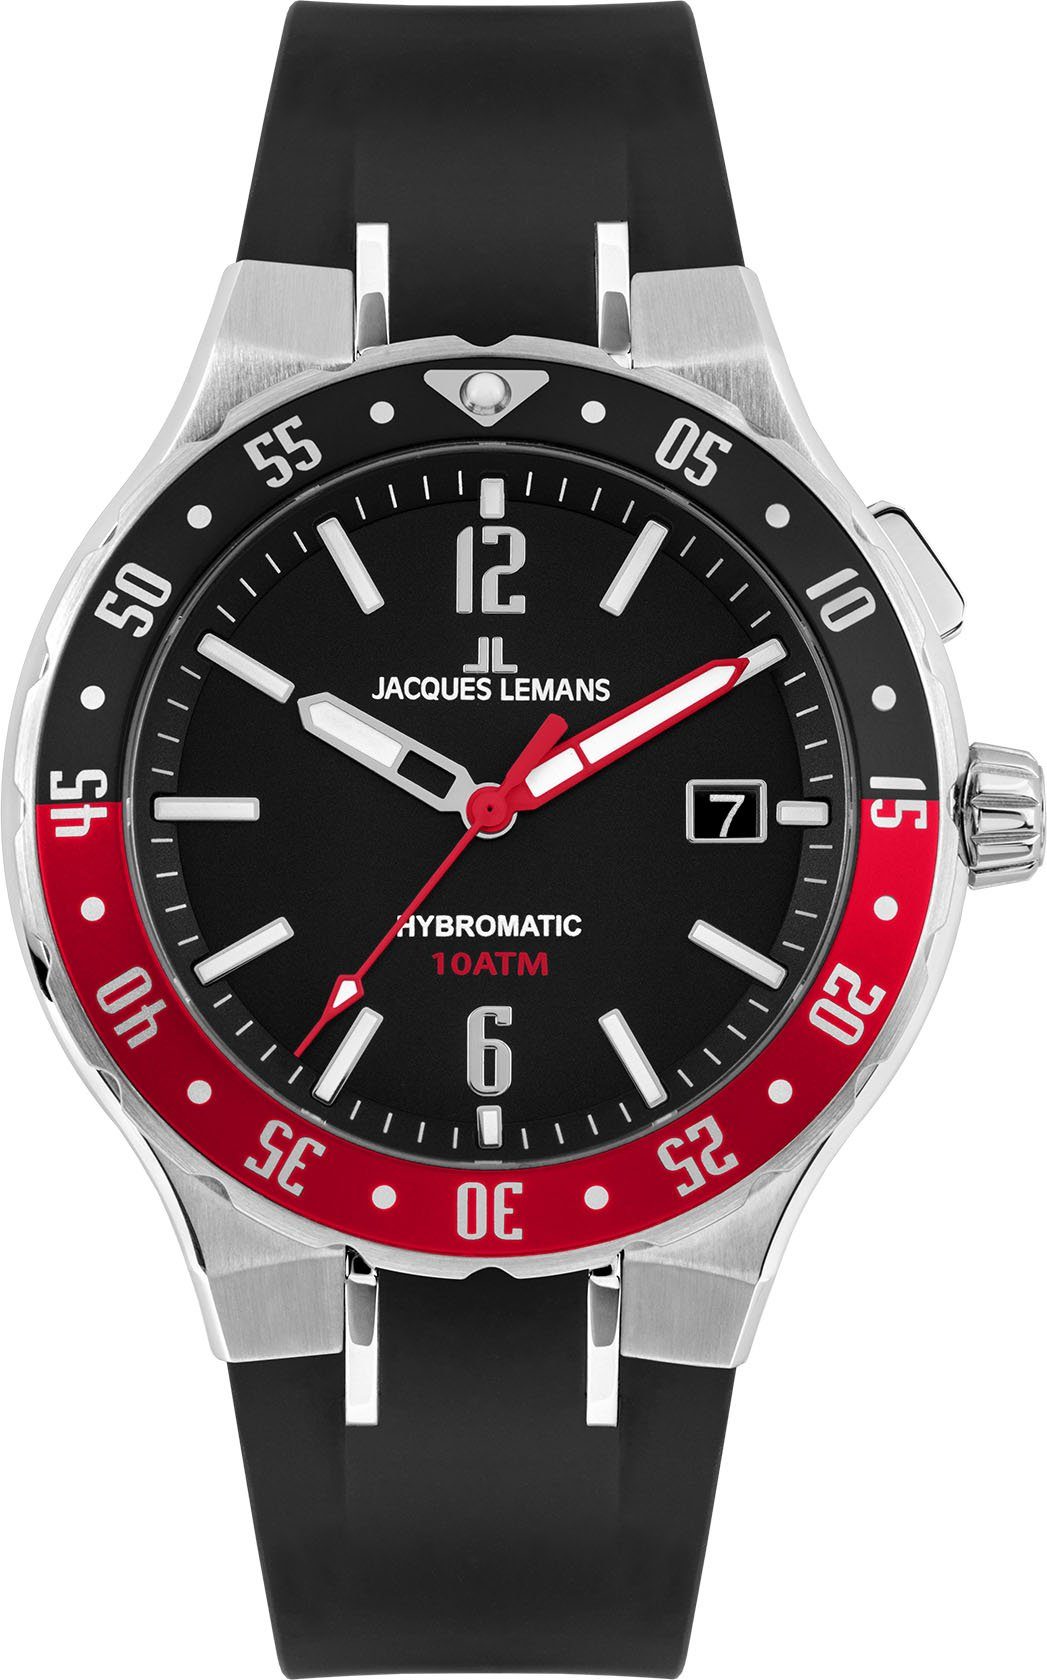 Jacques Lemans Kineticuhr rot, Hybromatic, 1-2109A schwarz